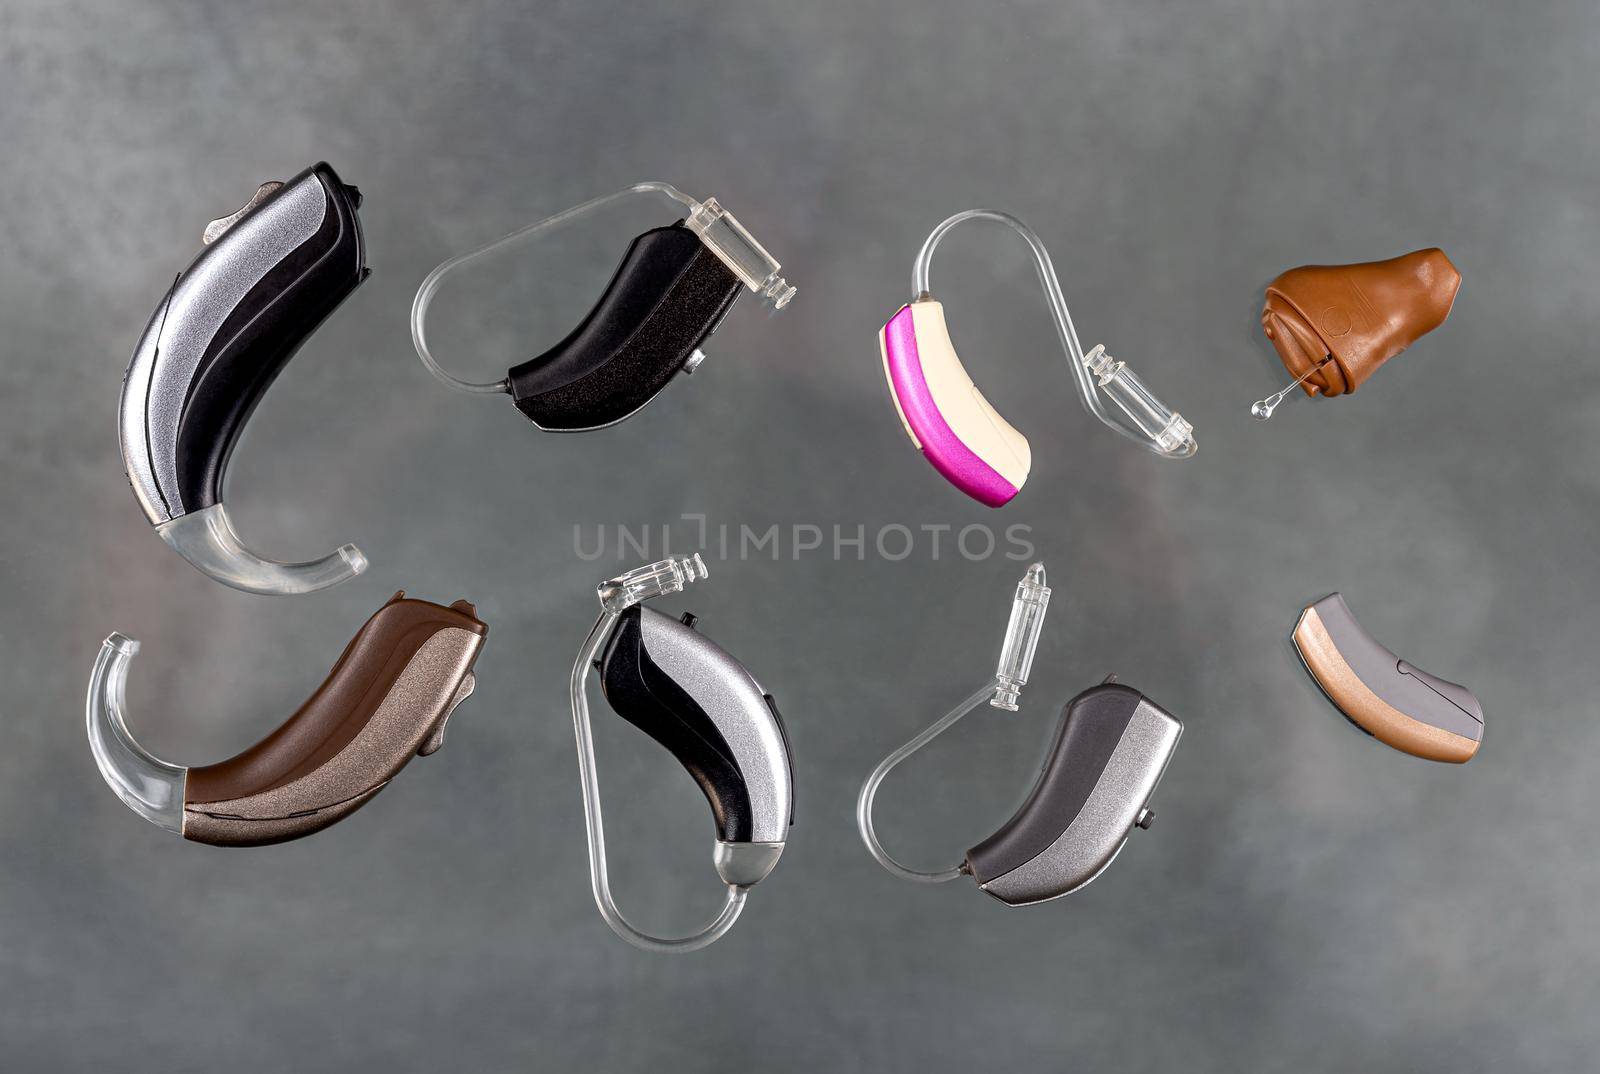 Presentation of a wide range of hearing aids seen from above on a gray background.